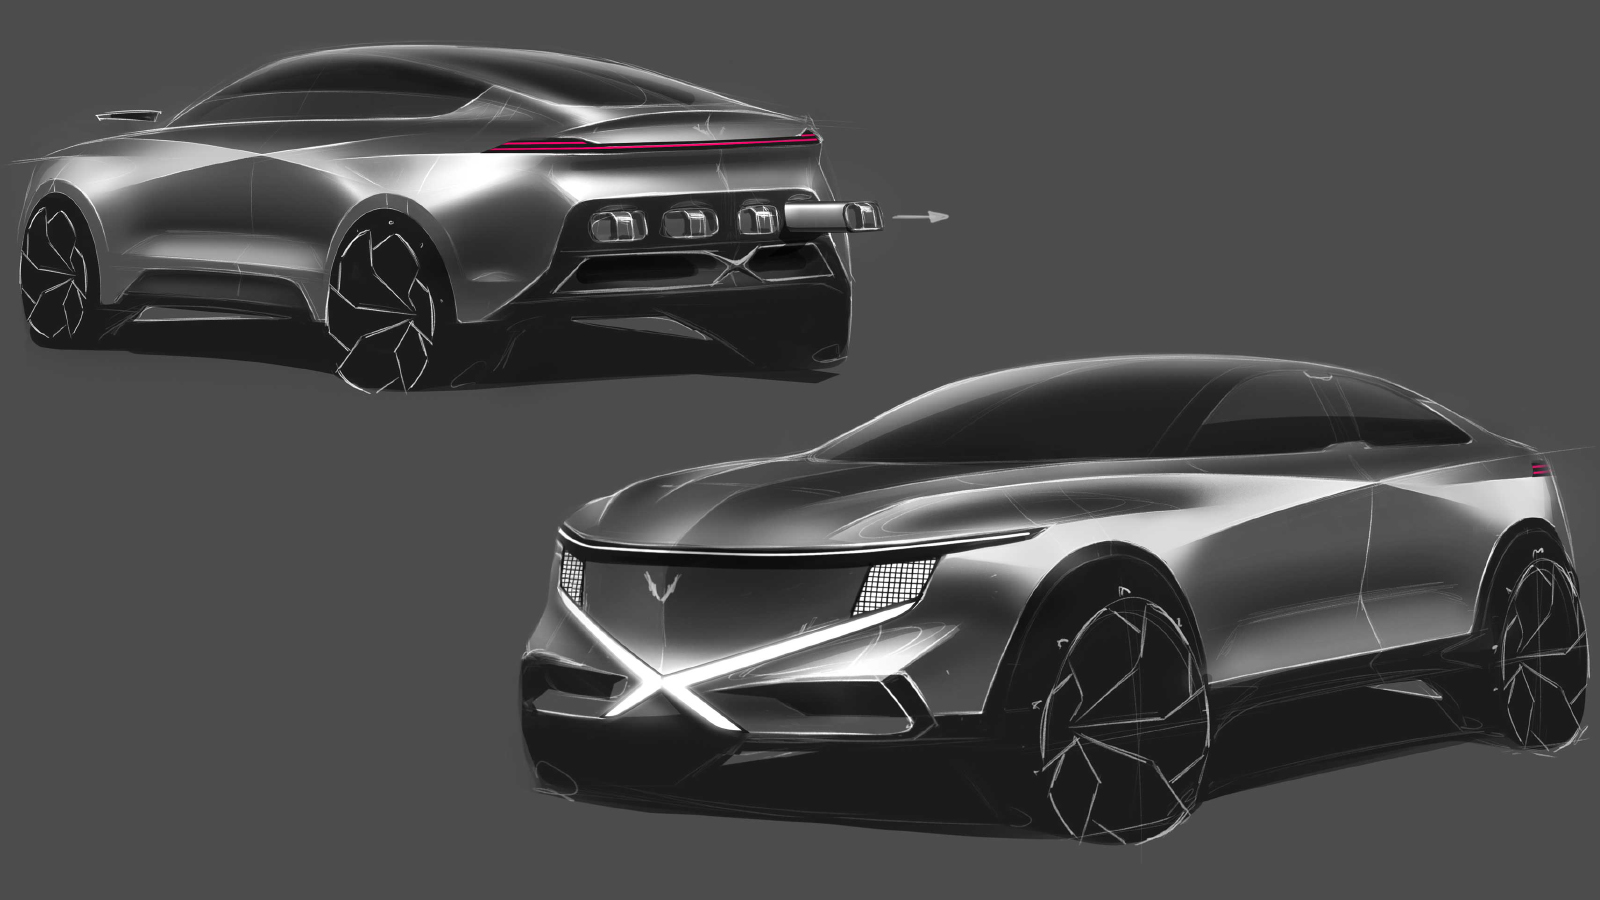 The hydrogen SUV being developed by Pininfarina and NAMX